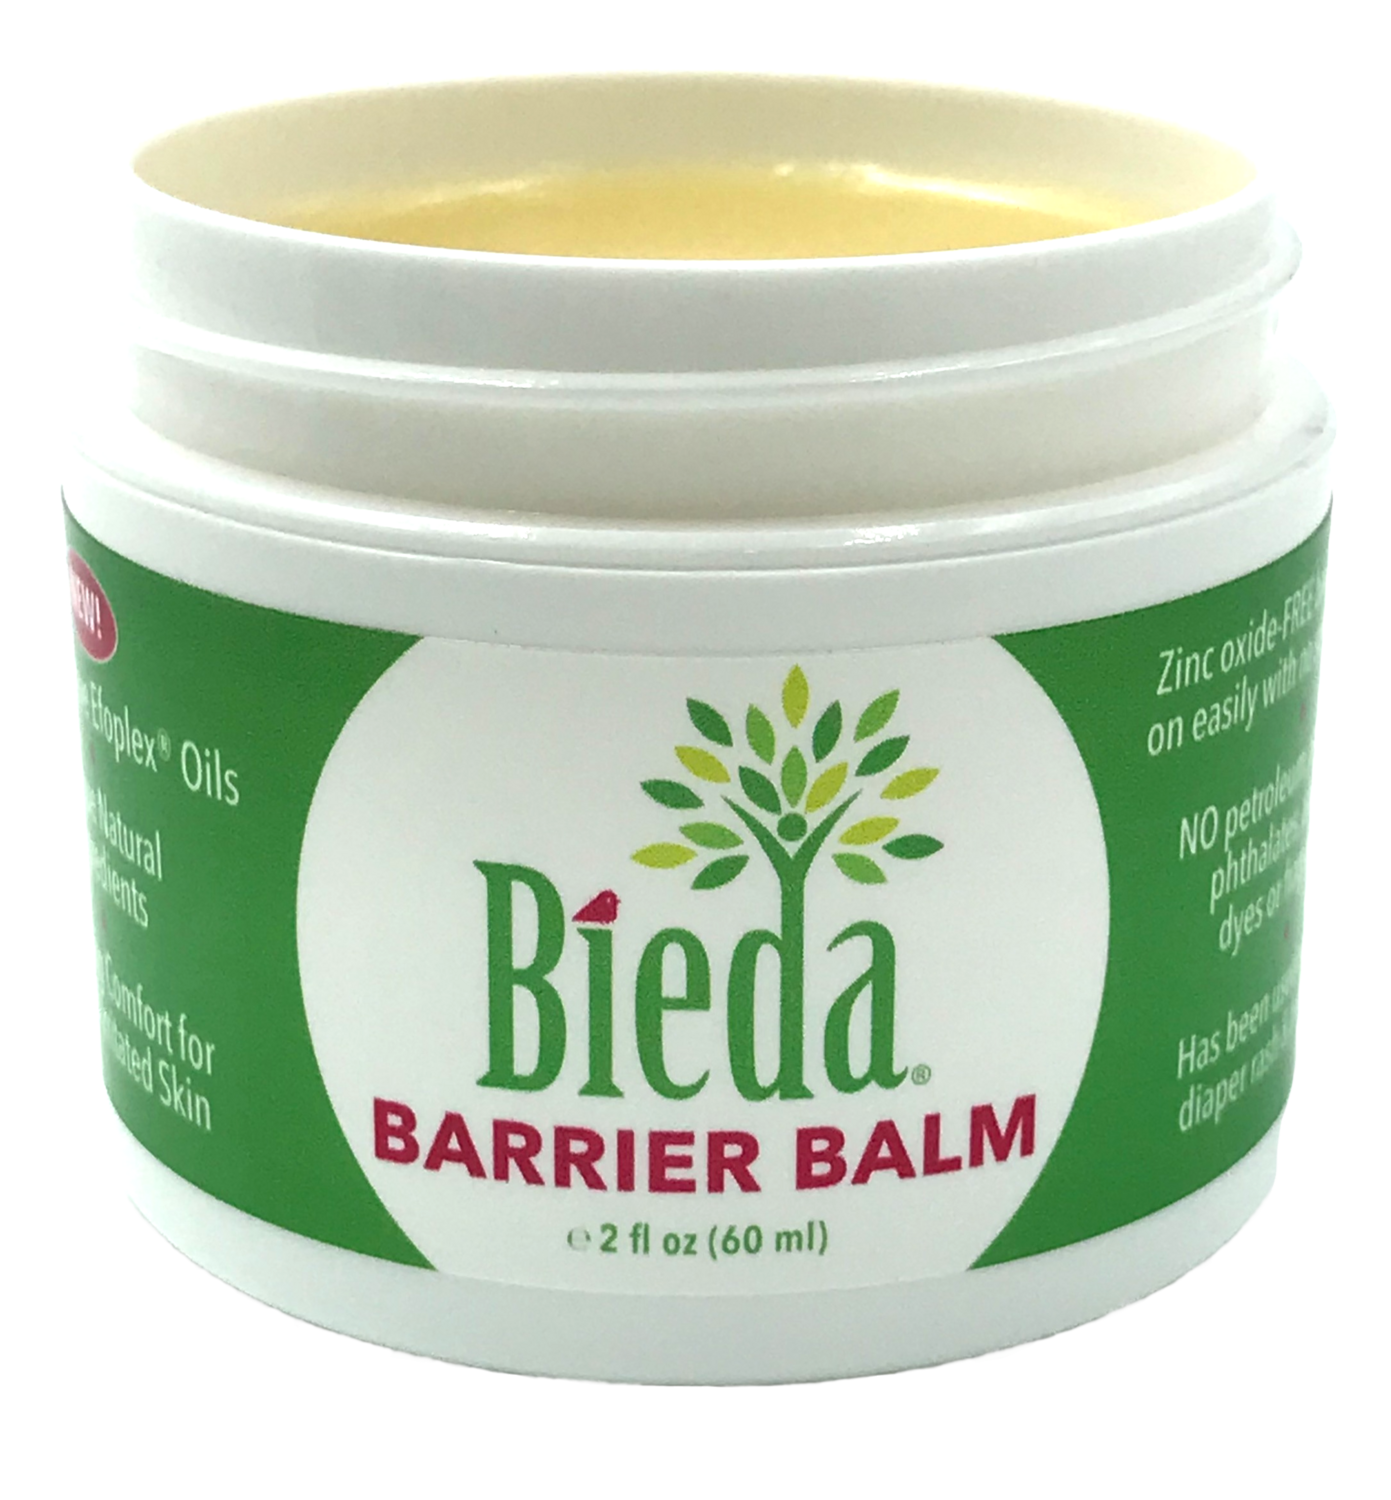 2 oz jar, pack of 4
Barrier Balm -
(free shipping)